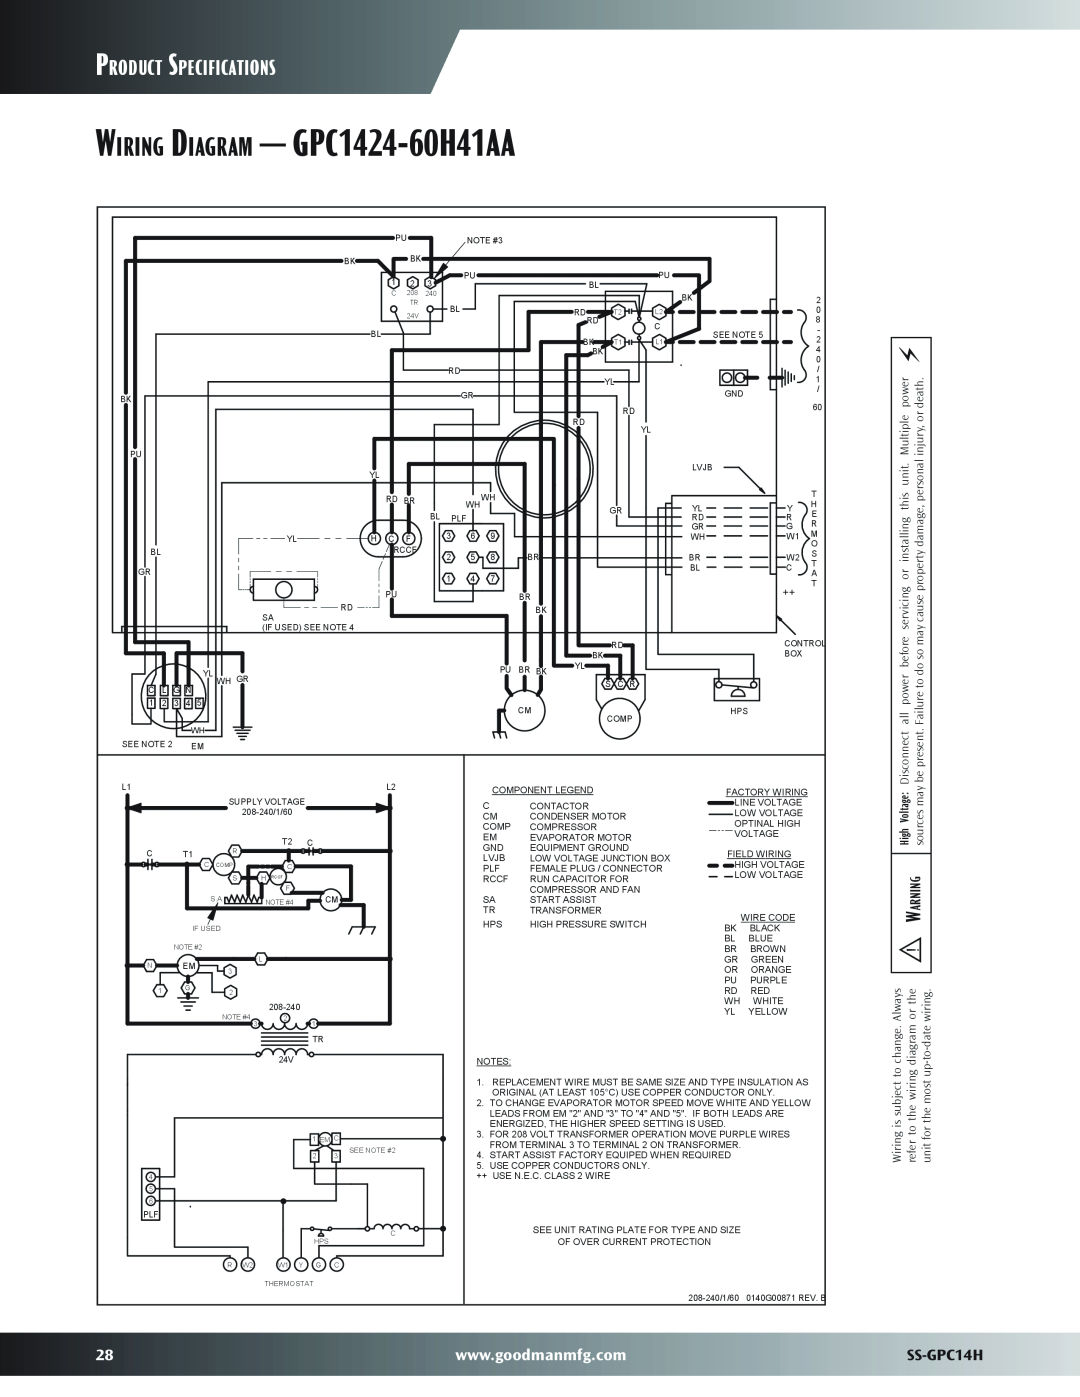 Goodman Mfg warranty Wiring Diagram - GPC1424-60H41AA, Product Specifications, SS-GPC14H, Disconnect, be present 